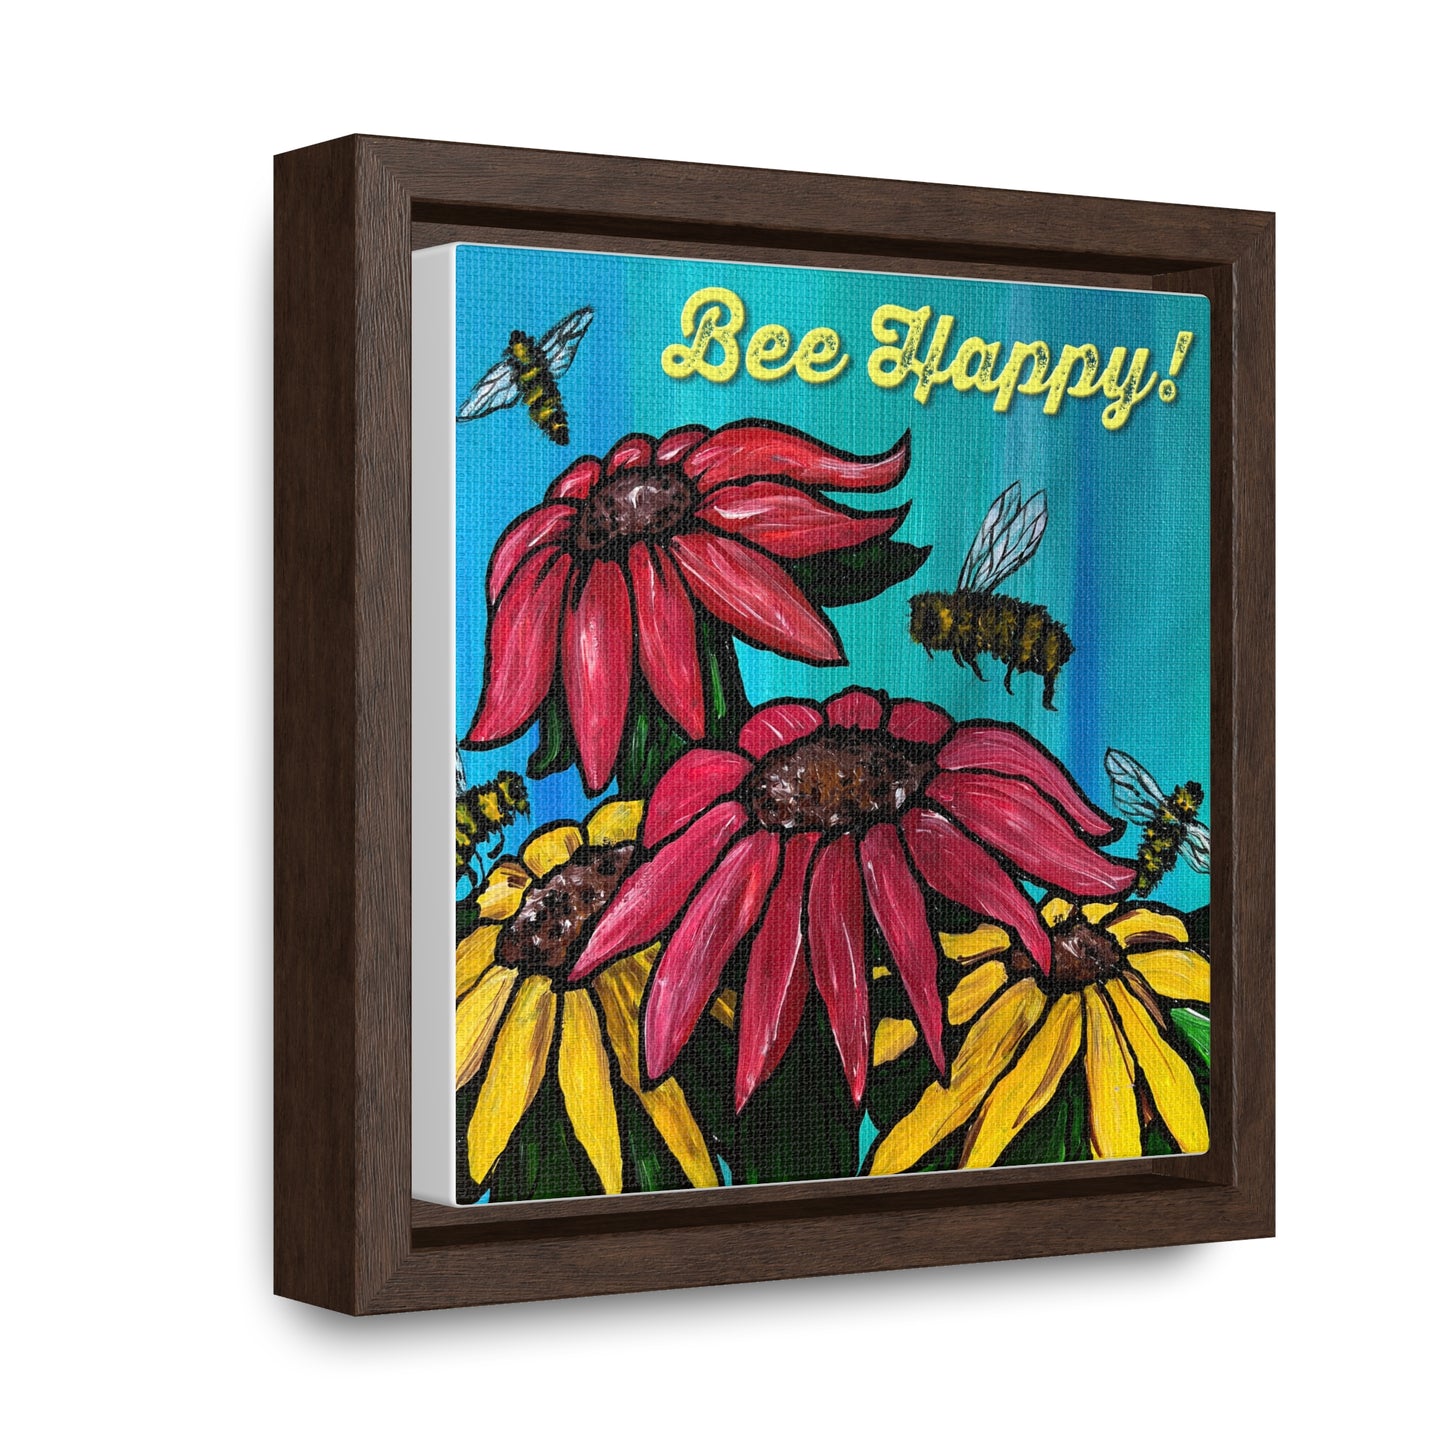 "Bee Happy" Flowers and Bees Print by Patricia Gallery Canvas Wrap, Square Frame